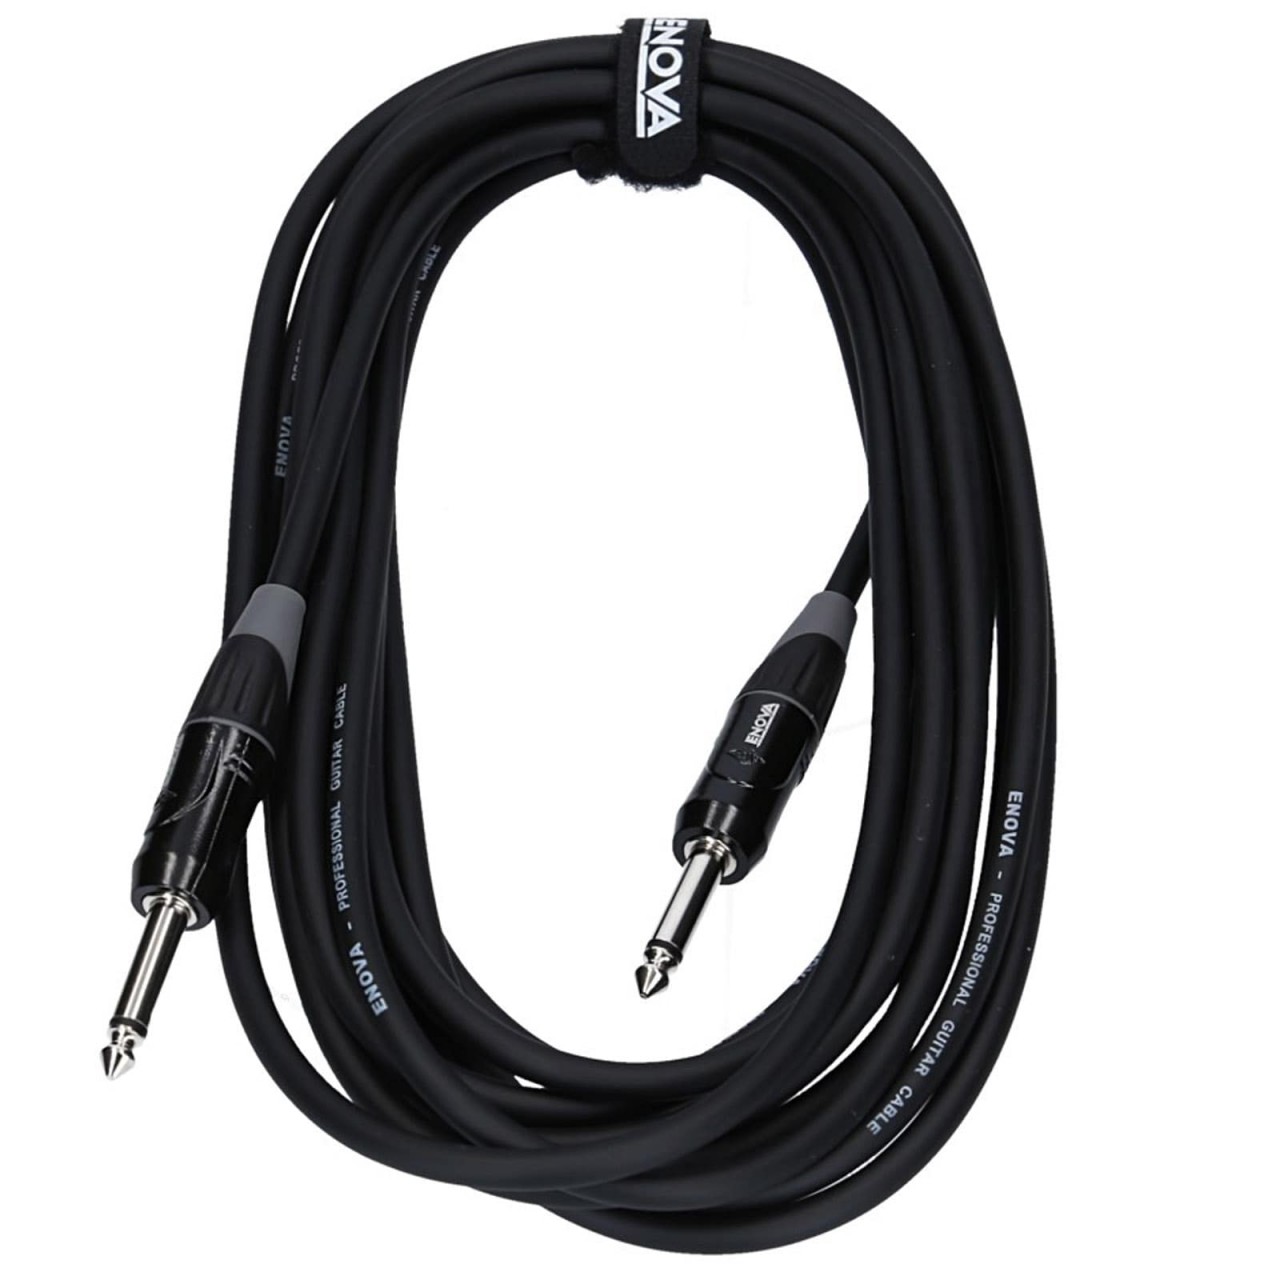 5 meter jack cable mono with velcro closure